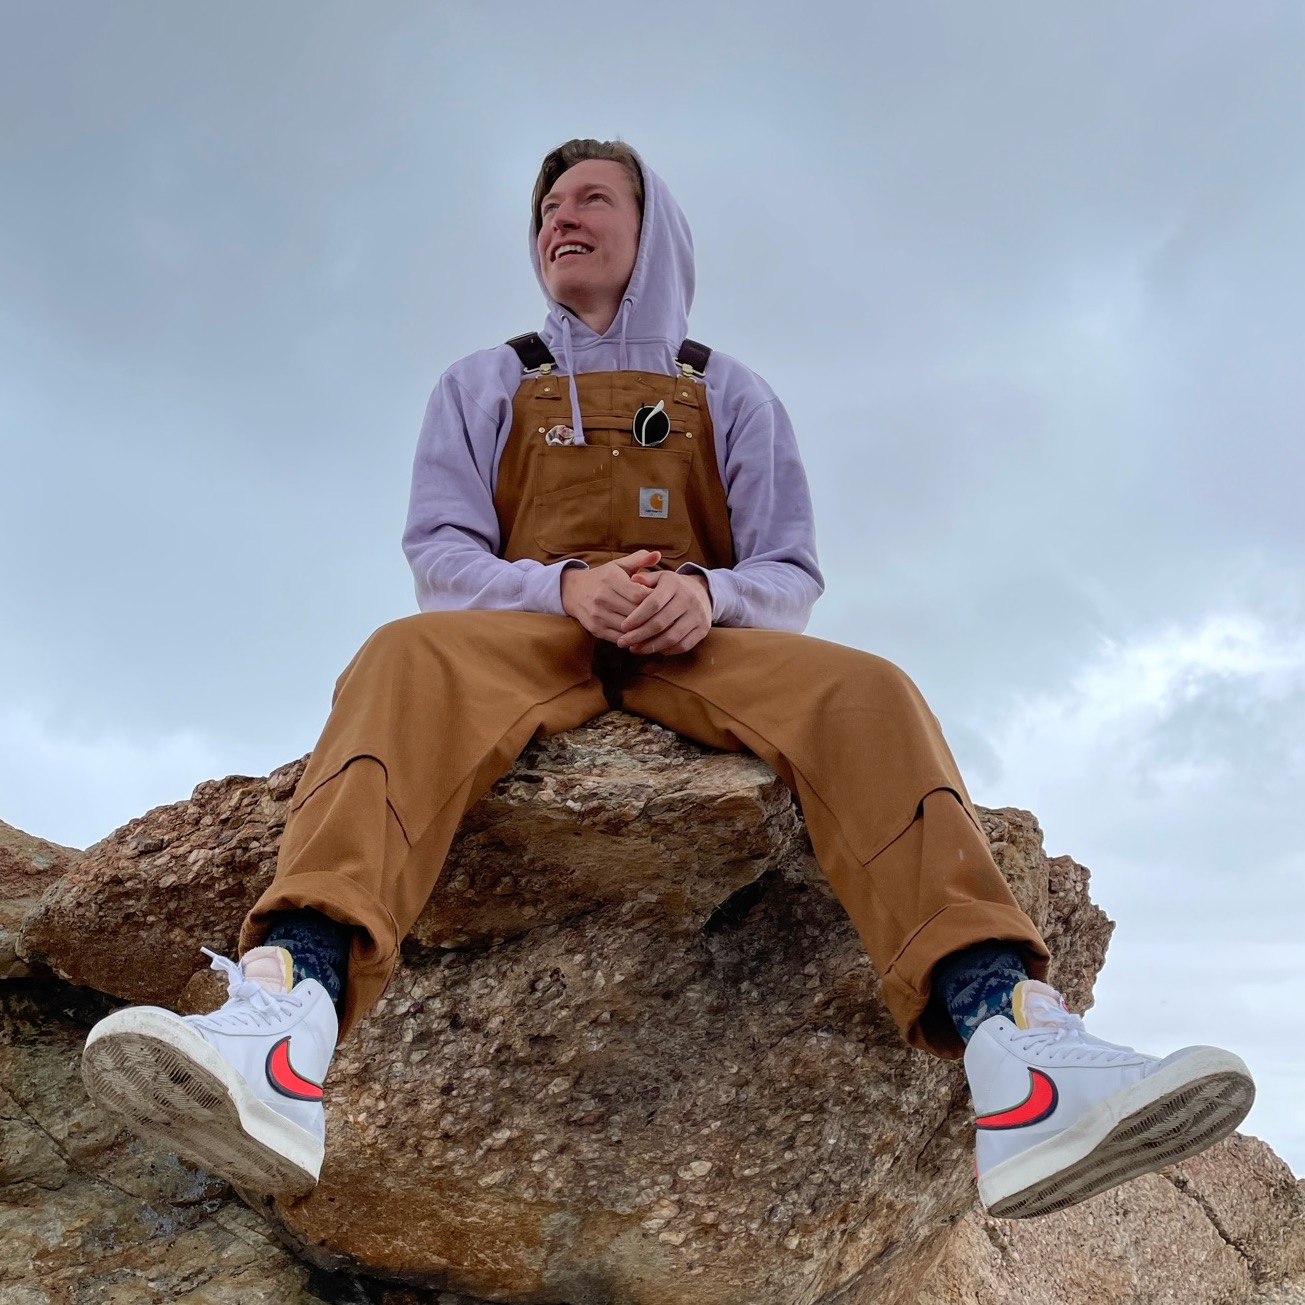 A picture of me sitting on a rock, wearing a hoodie and overalls